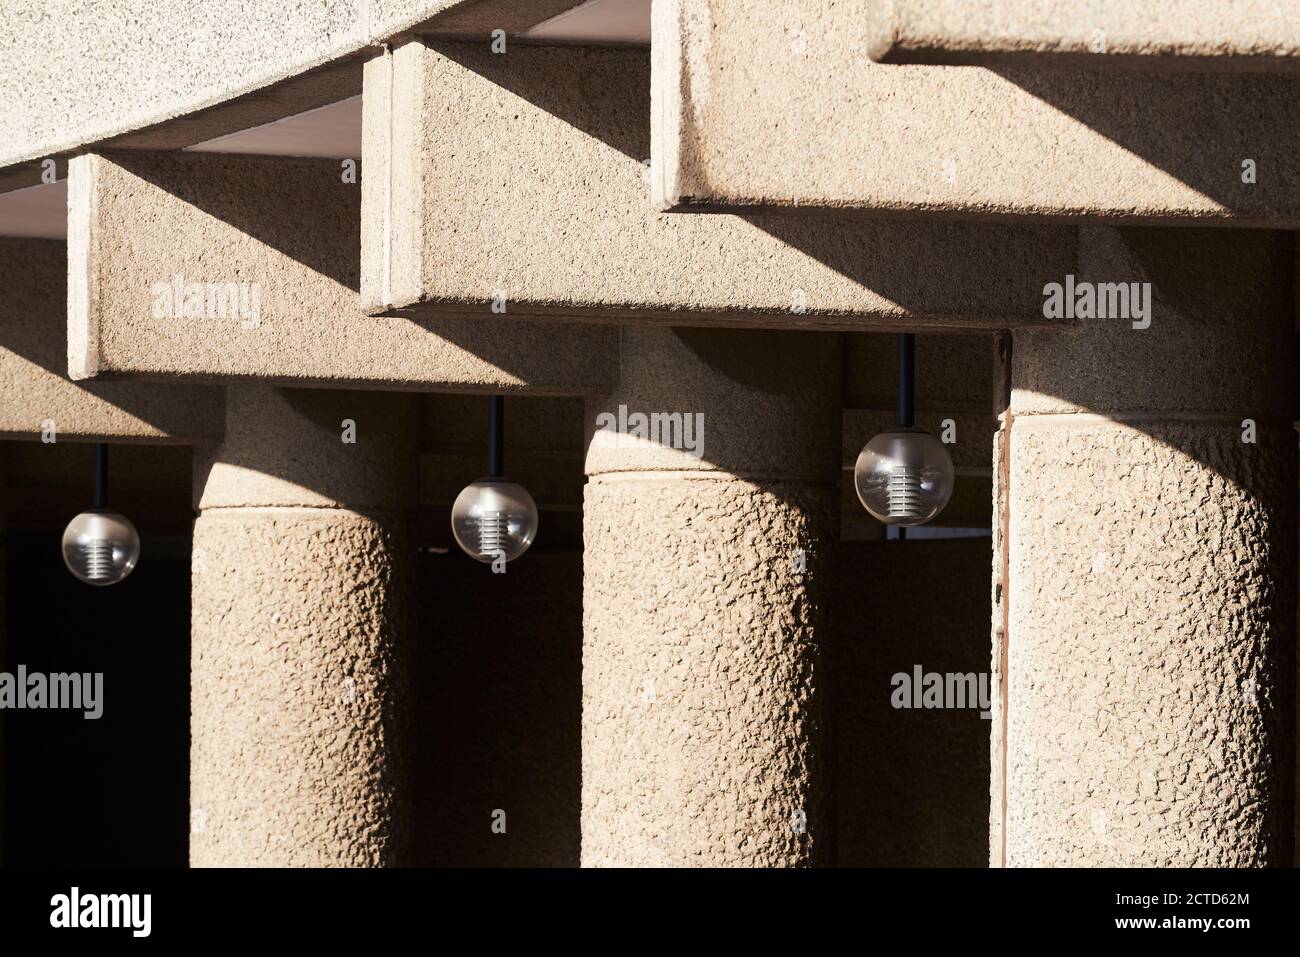 Exterior detail of Frobisher Crescent, the Barbican Estate, City of London UK. Designed by architects Chamberlin, Powell and Bon. Completed in 1982. Stock Photo